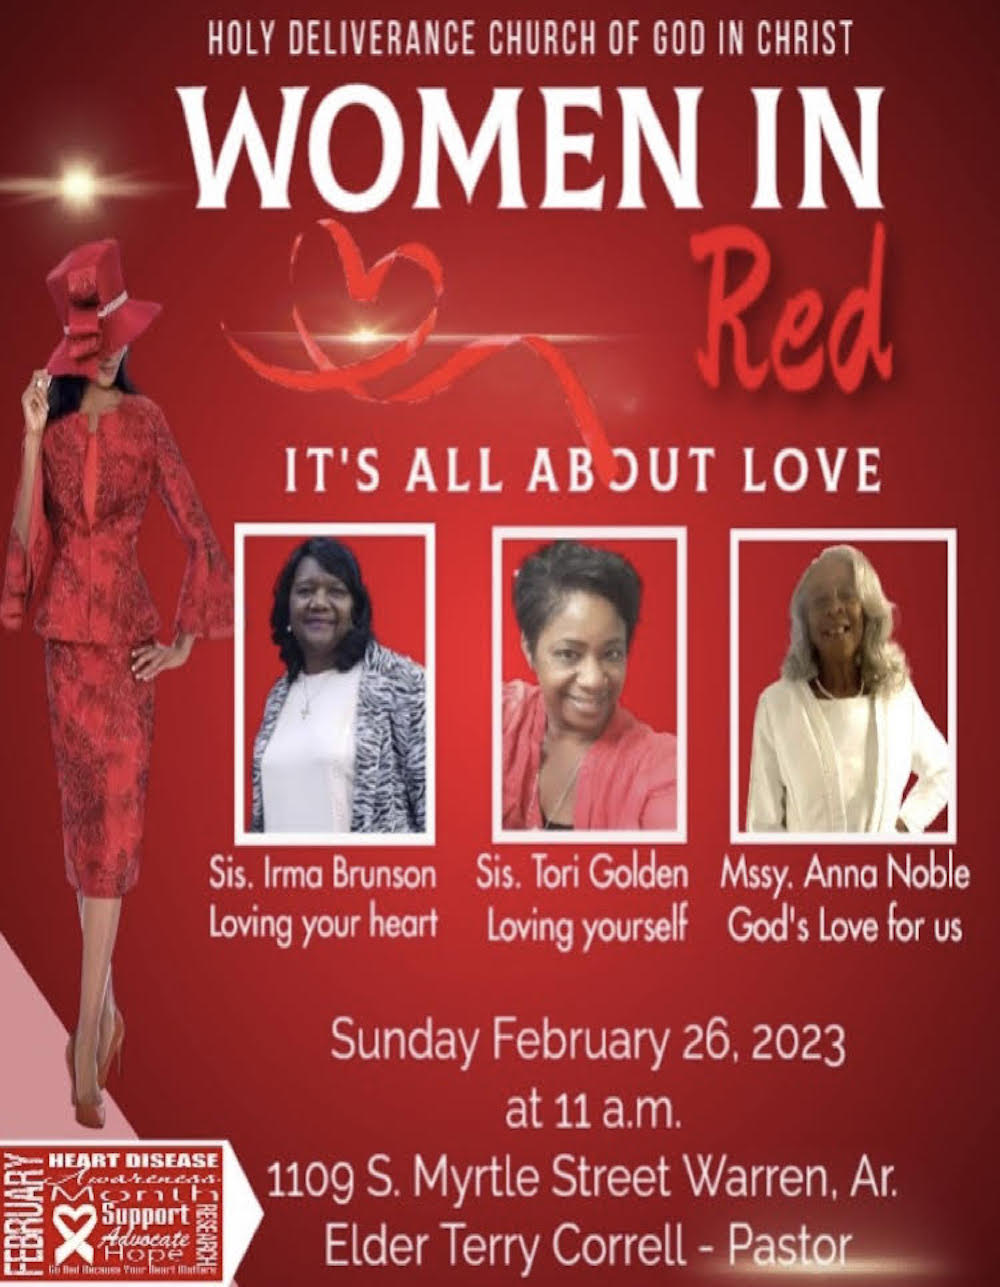 Women In Red event being held February 26 at Holy Deliverance COGIC